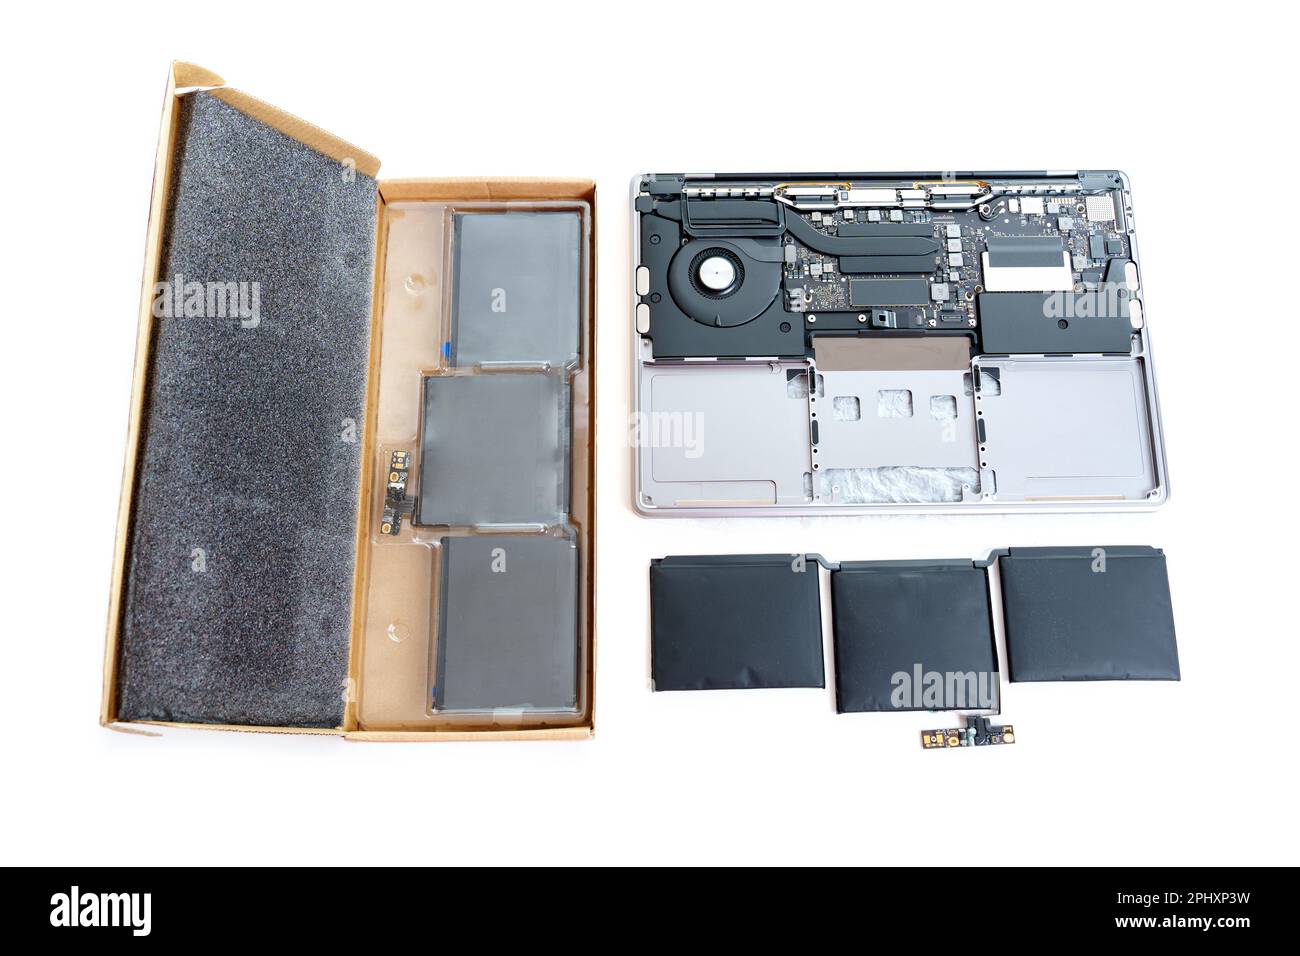 Disassembled laptop with a swollen battery removed, alongside a brand new replacement battery still in its packaging isolated on white background. Stock Photo